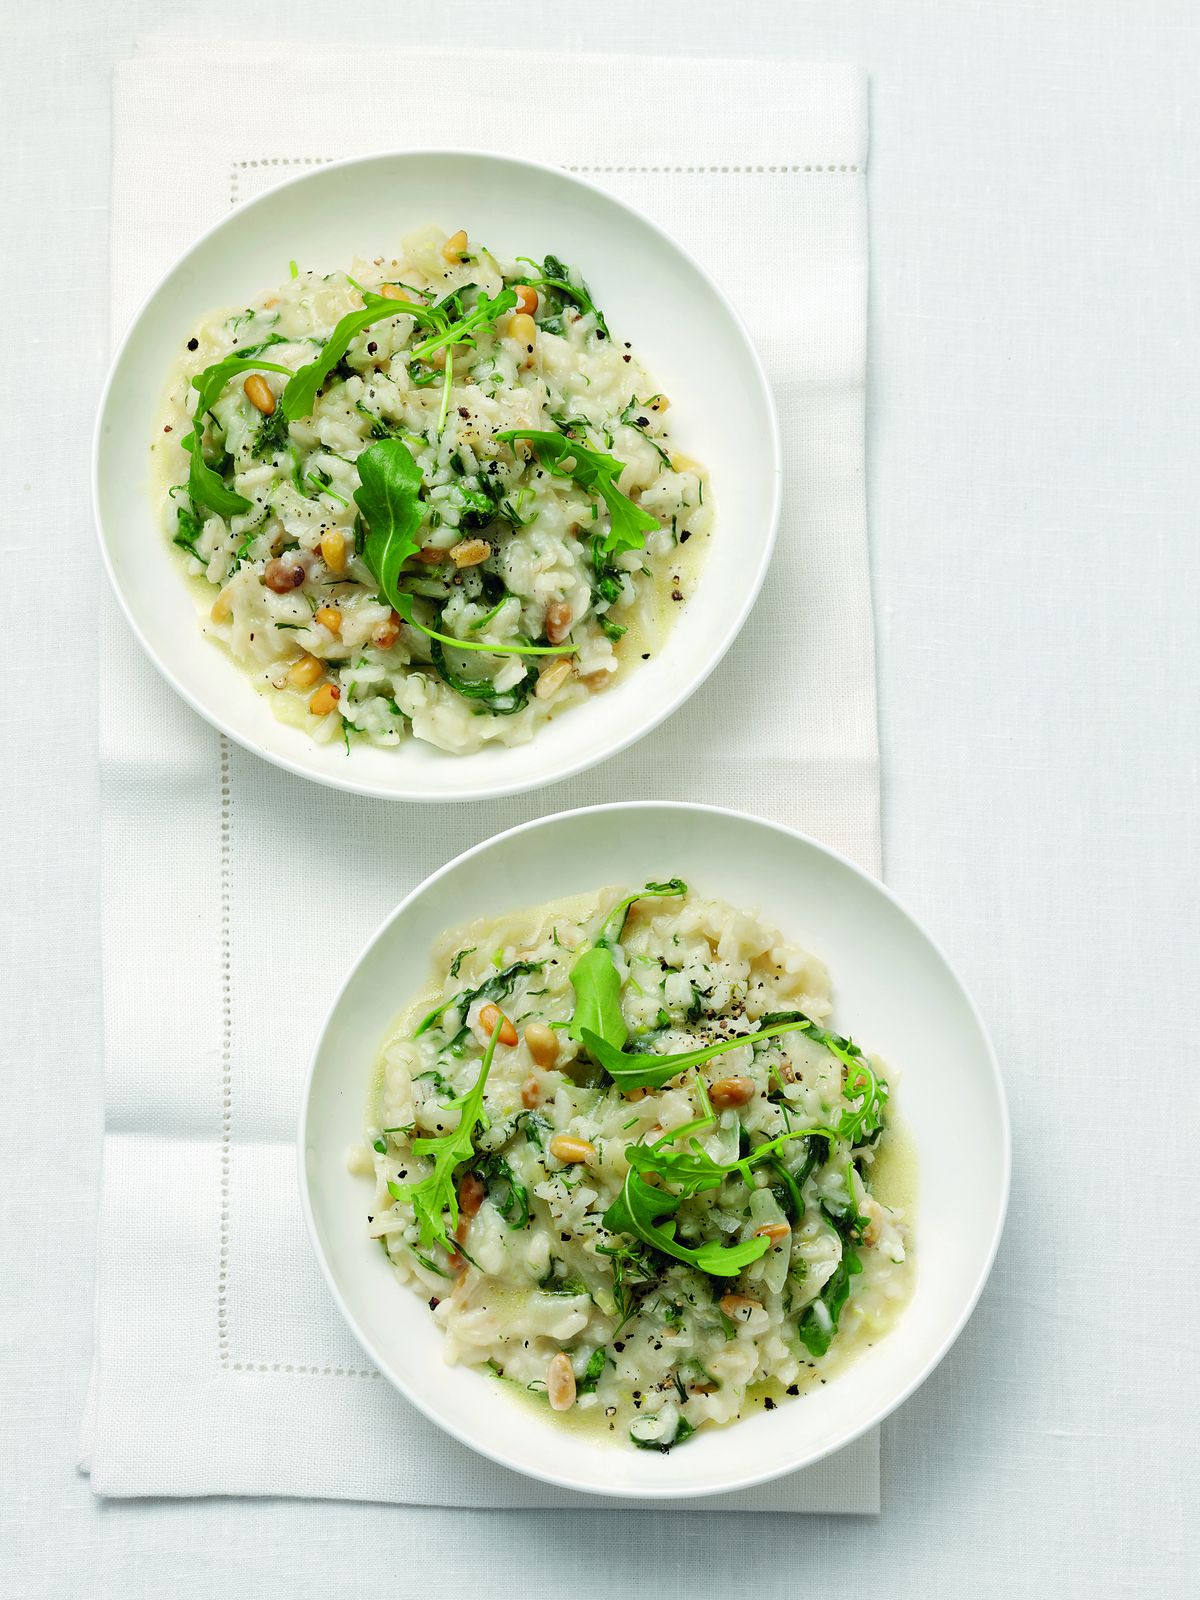 Slow-Cooker Pinenut, Fennel and Parmesan Risotto